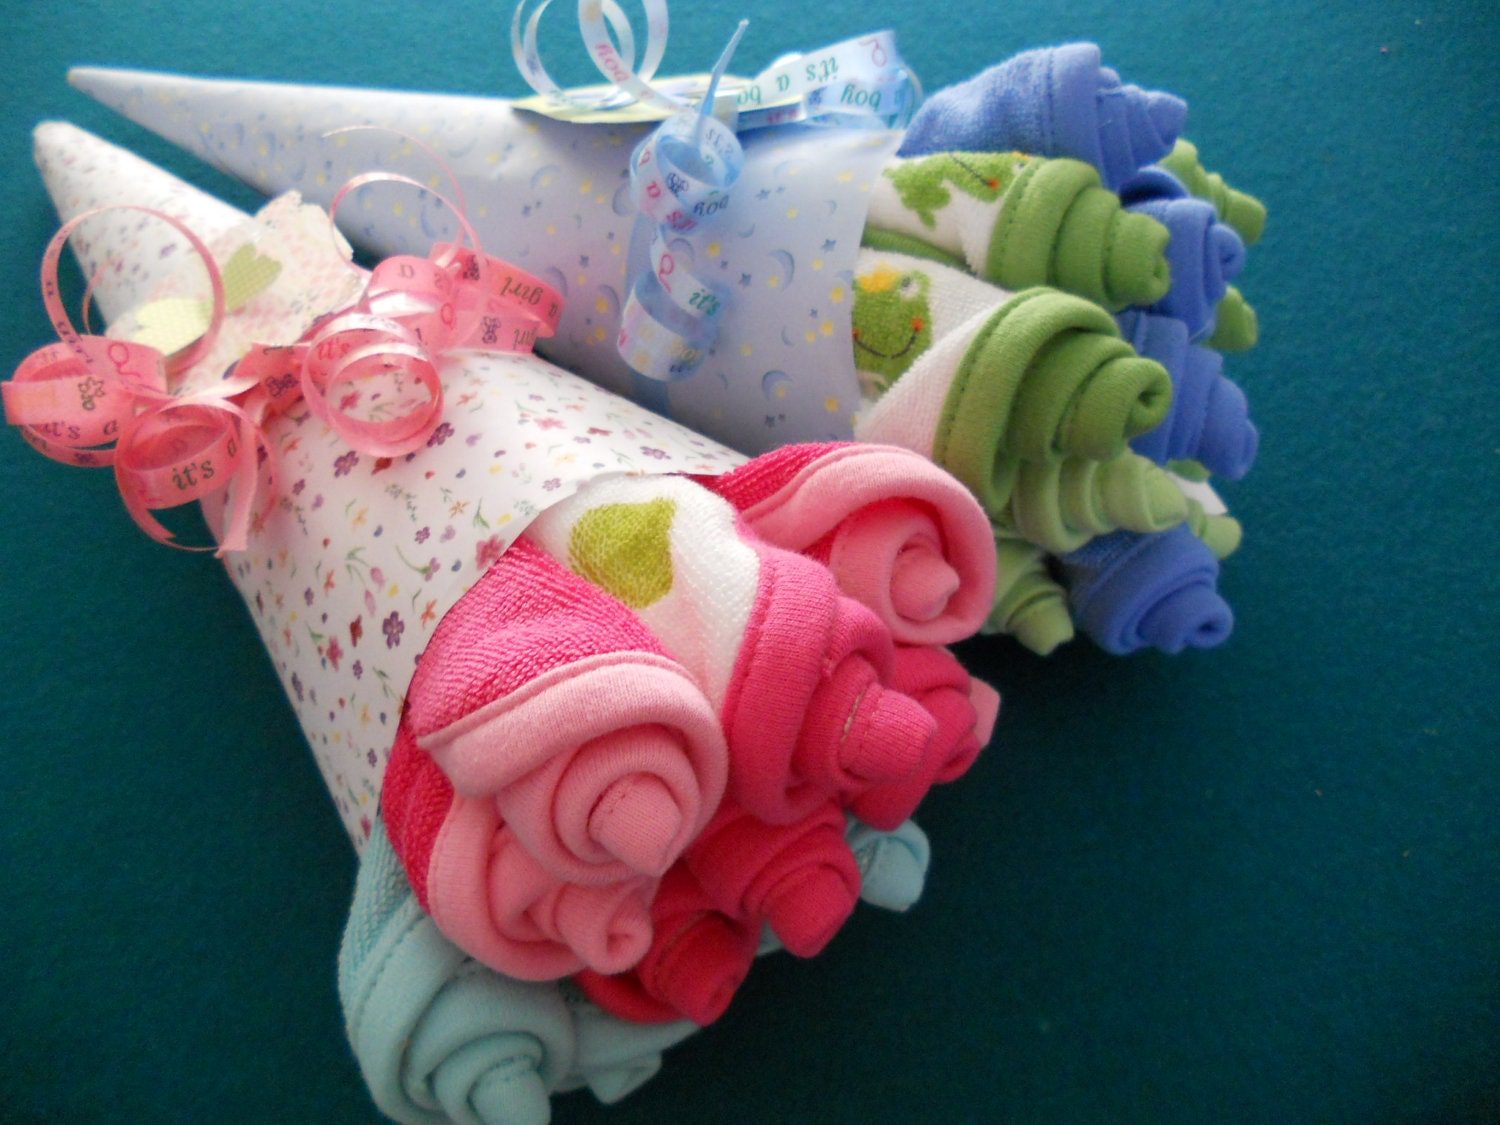 10% Off  Washcloth Rosebud Bouquet / Baby Shower Gift/ Hospital Gift/ Bridal Shower Gift  Available in Boy, Girl, Neutral , Bridal